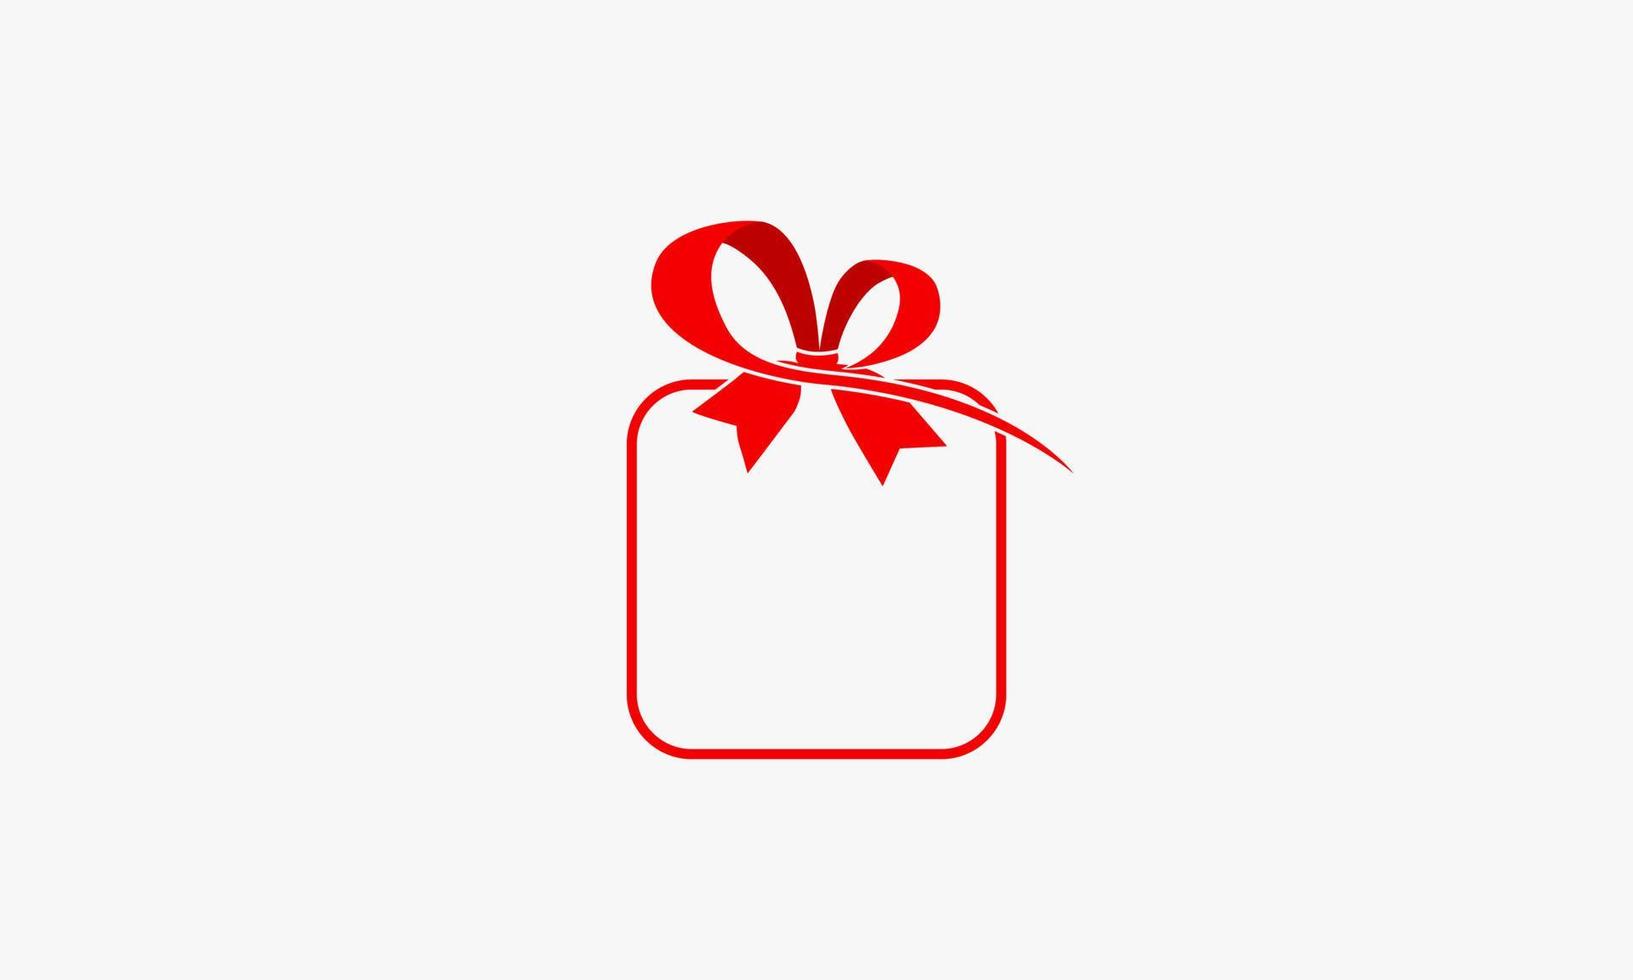 red gift vector illustration. isolated on white background. creative icon.